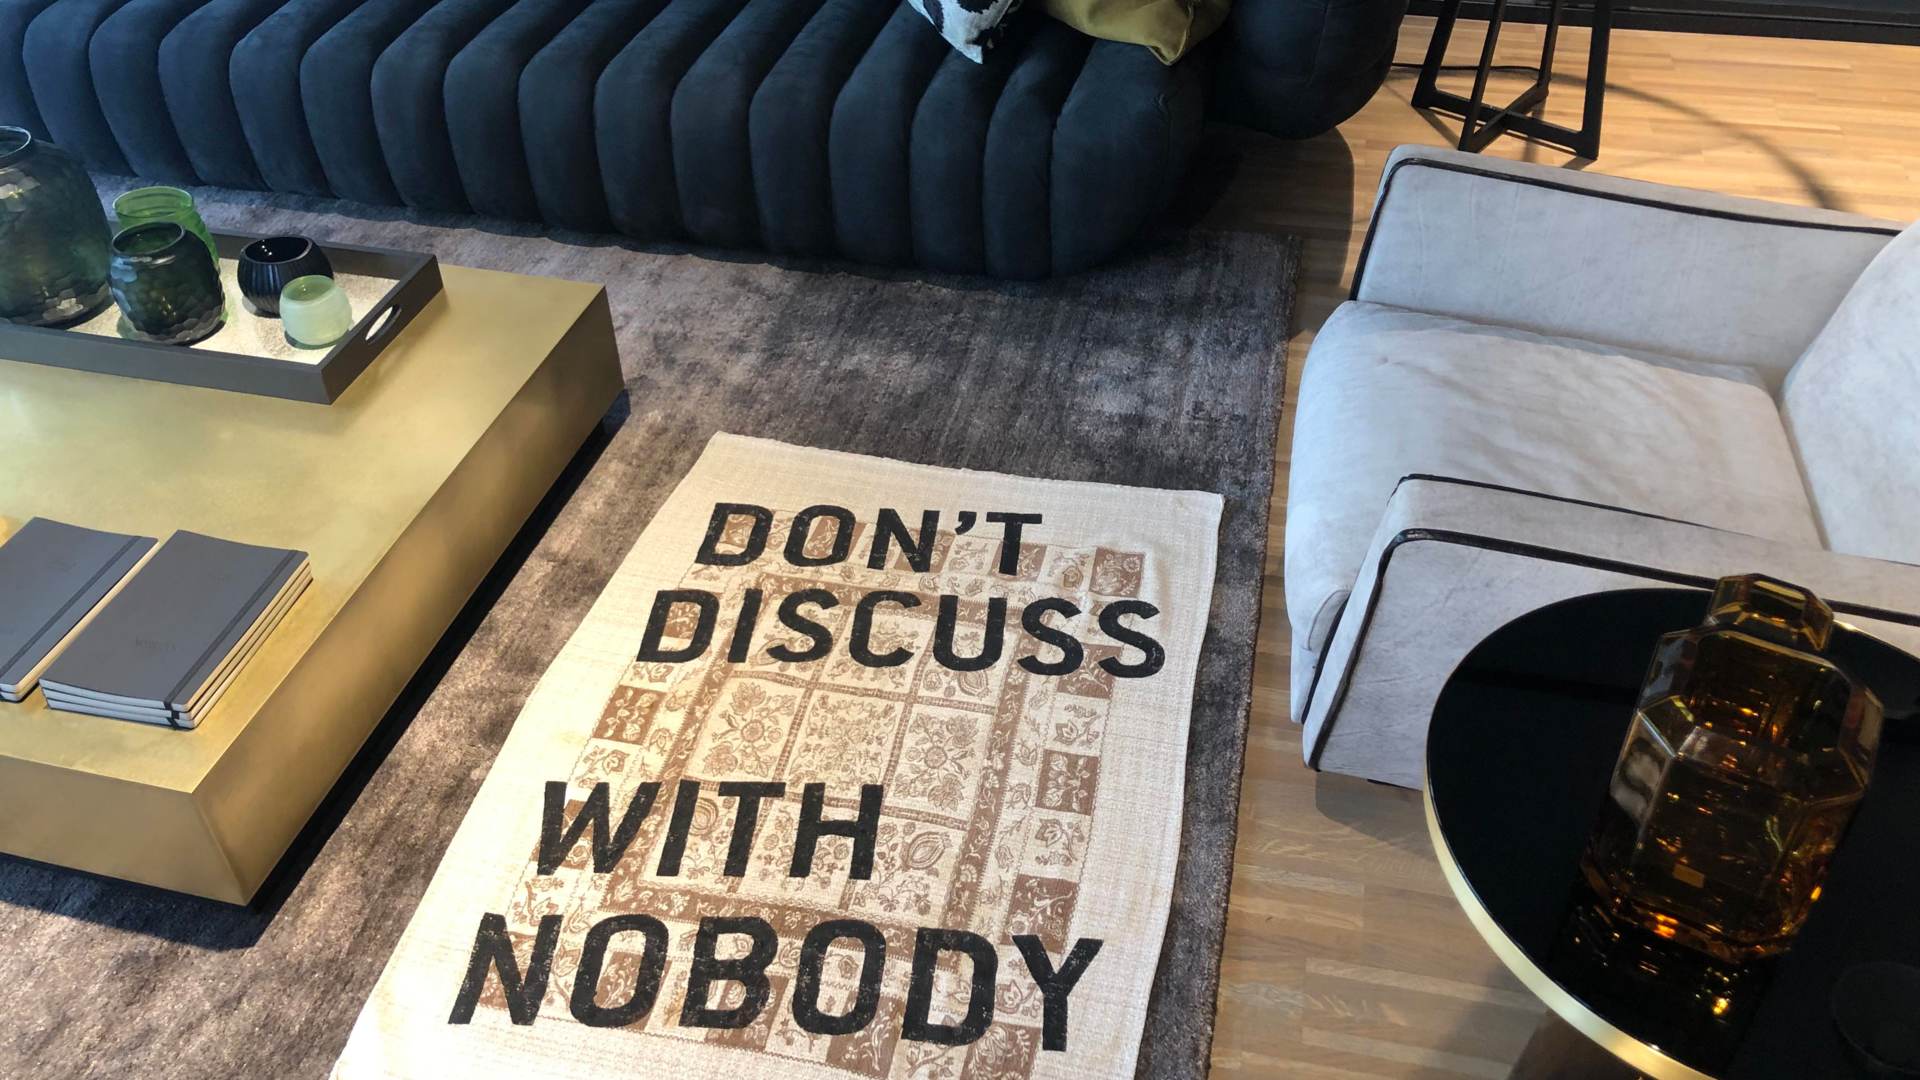 Don't discuss with nobody